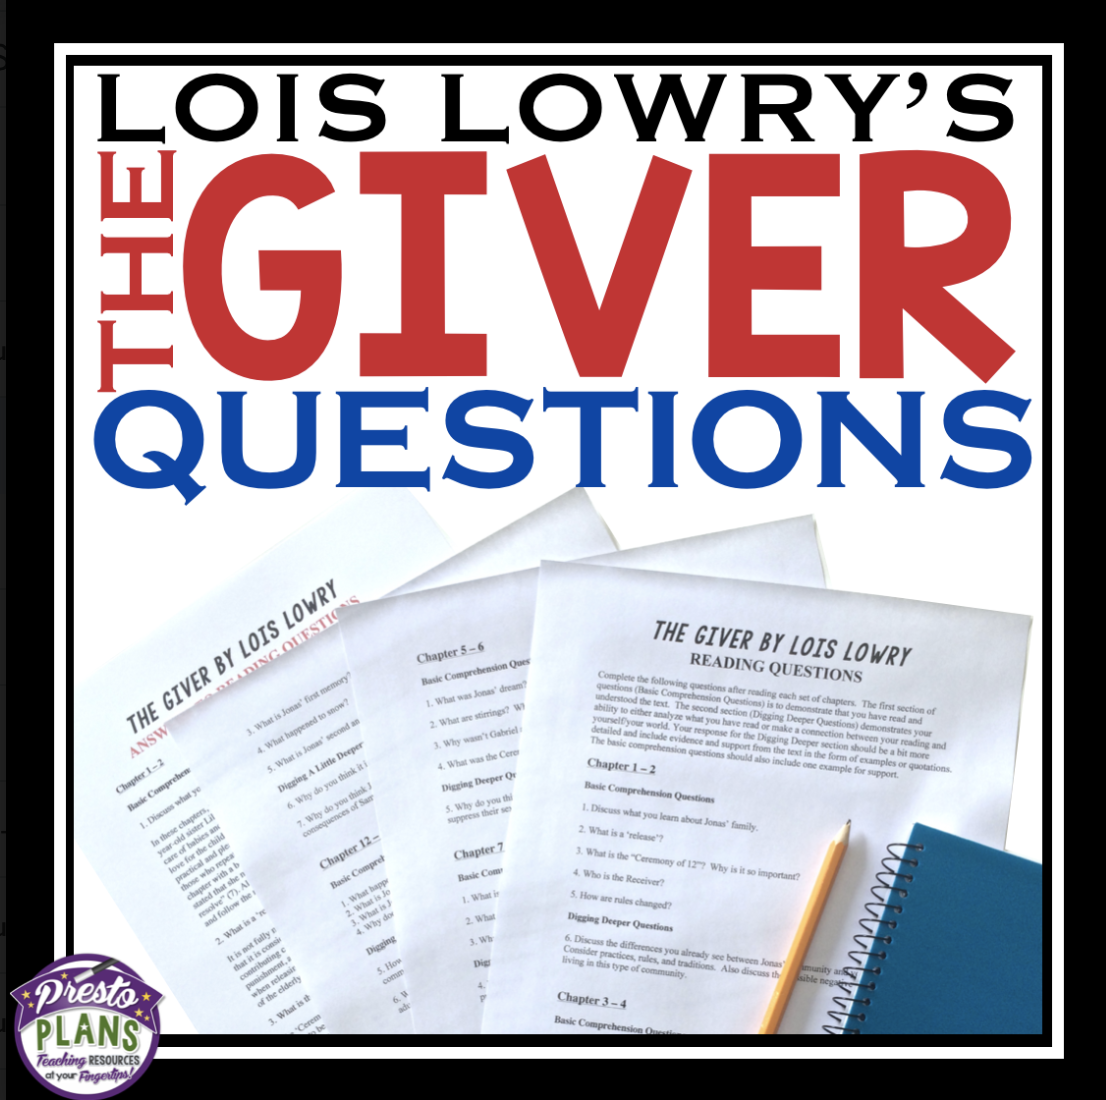 giver questions